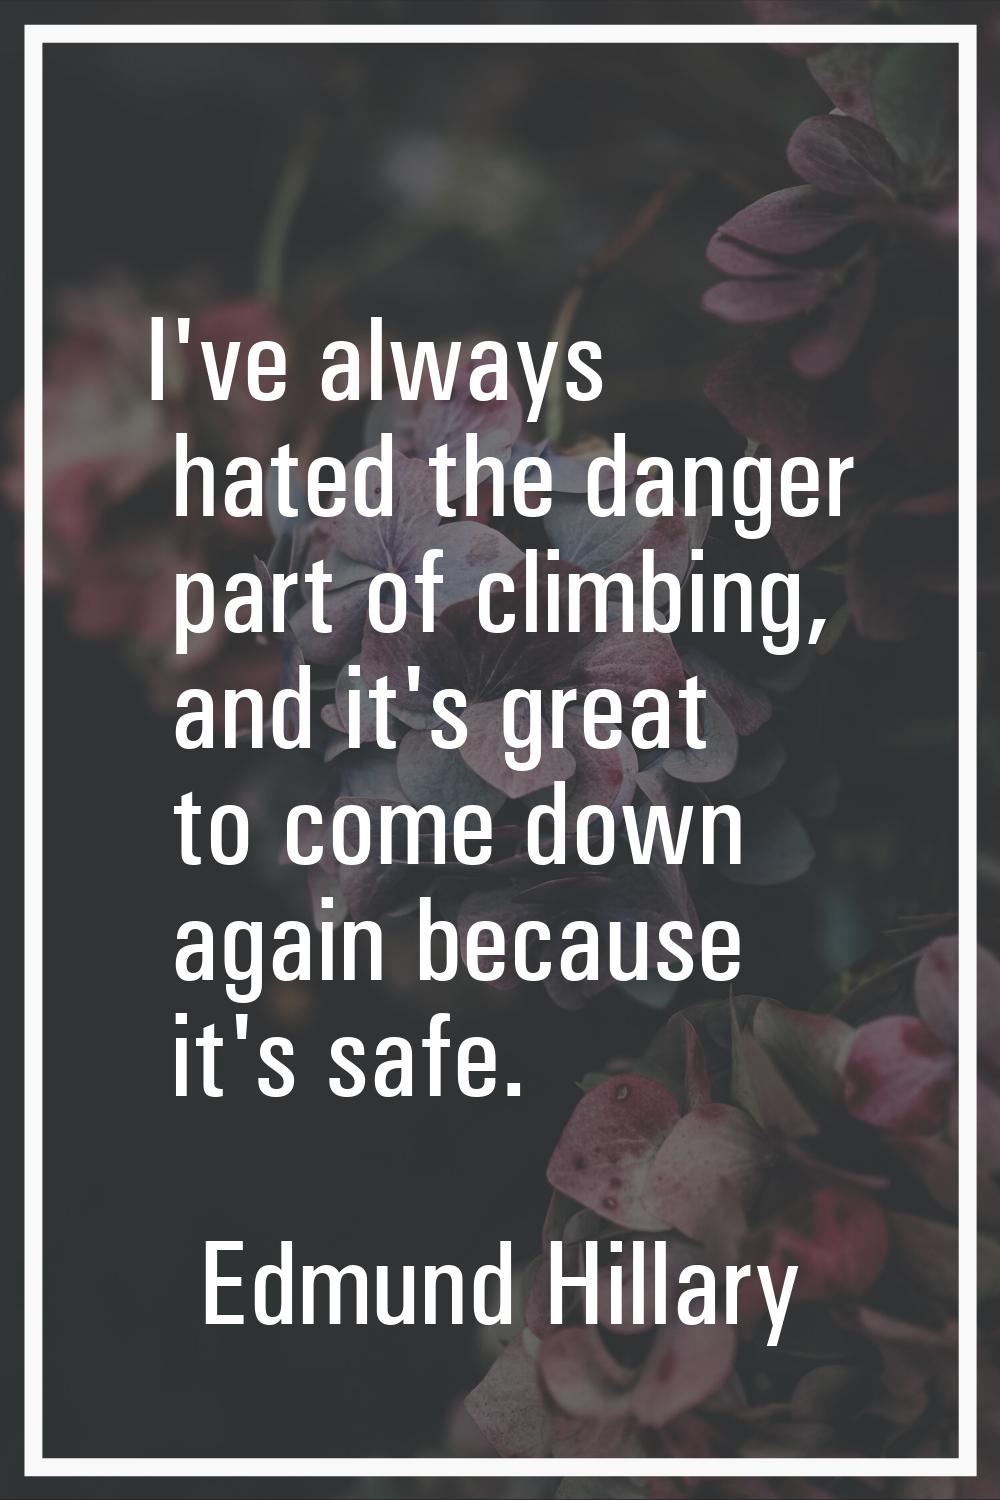 I've always hated the danger part of climbing, and it's great to come down again because it's safe.